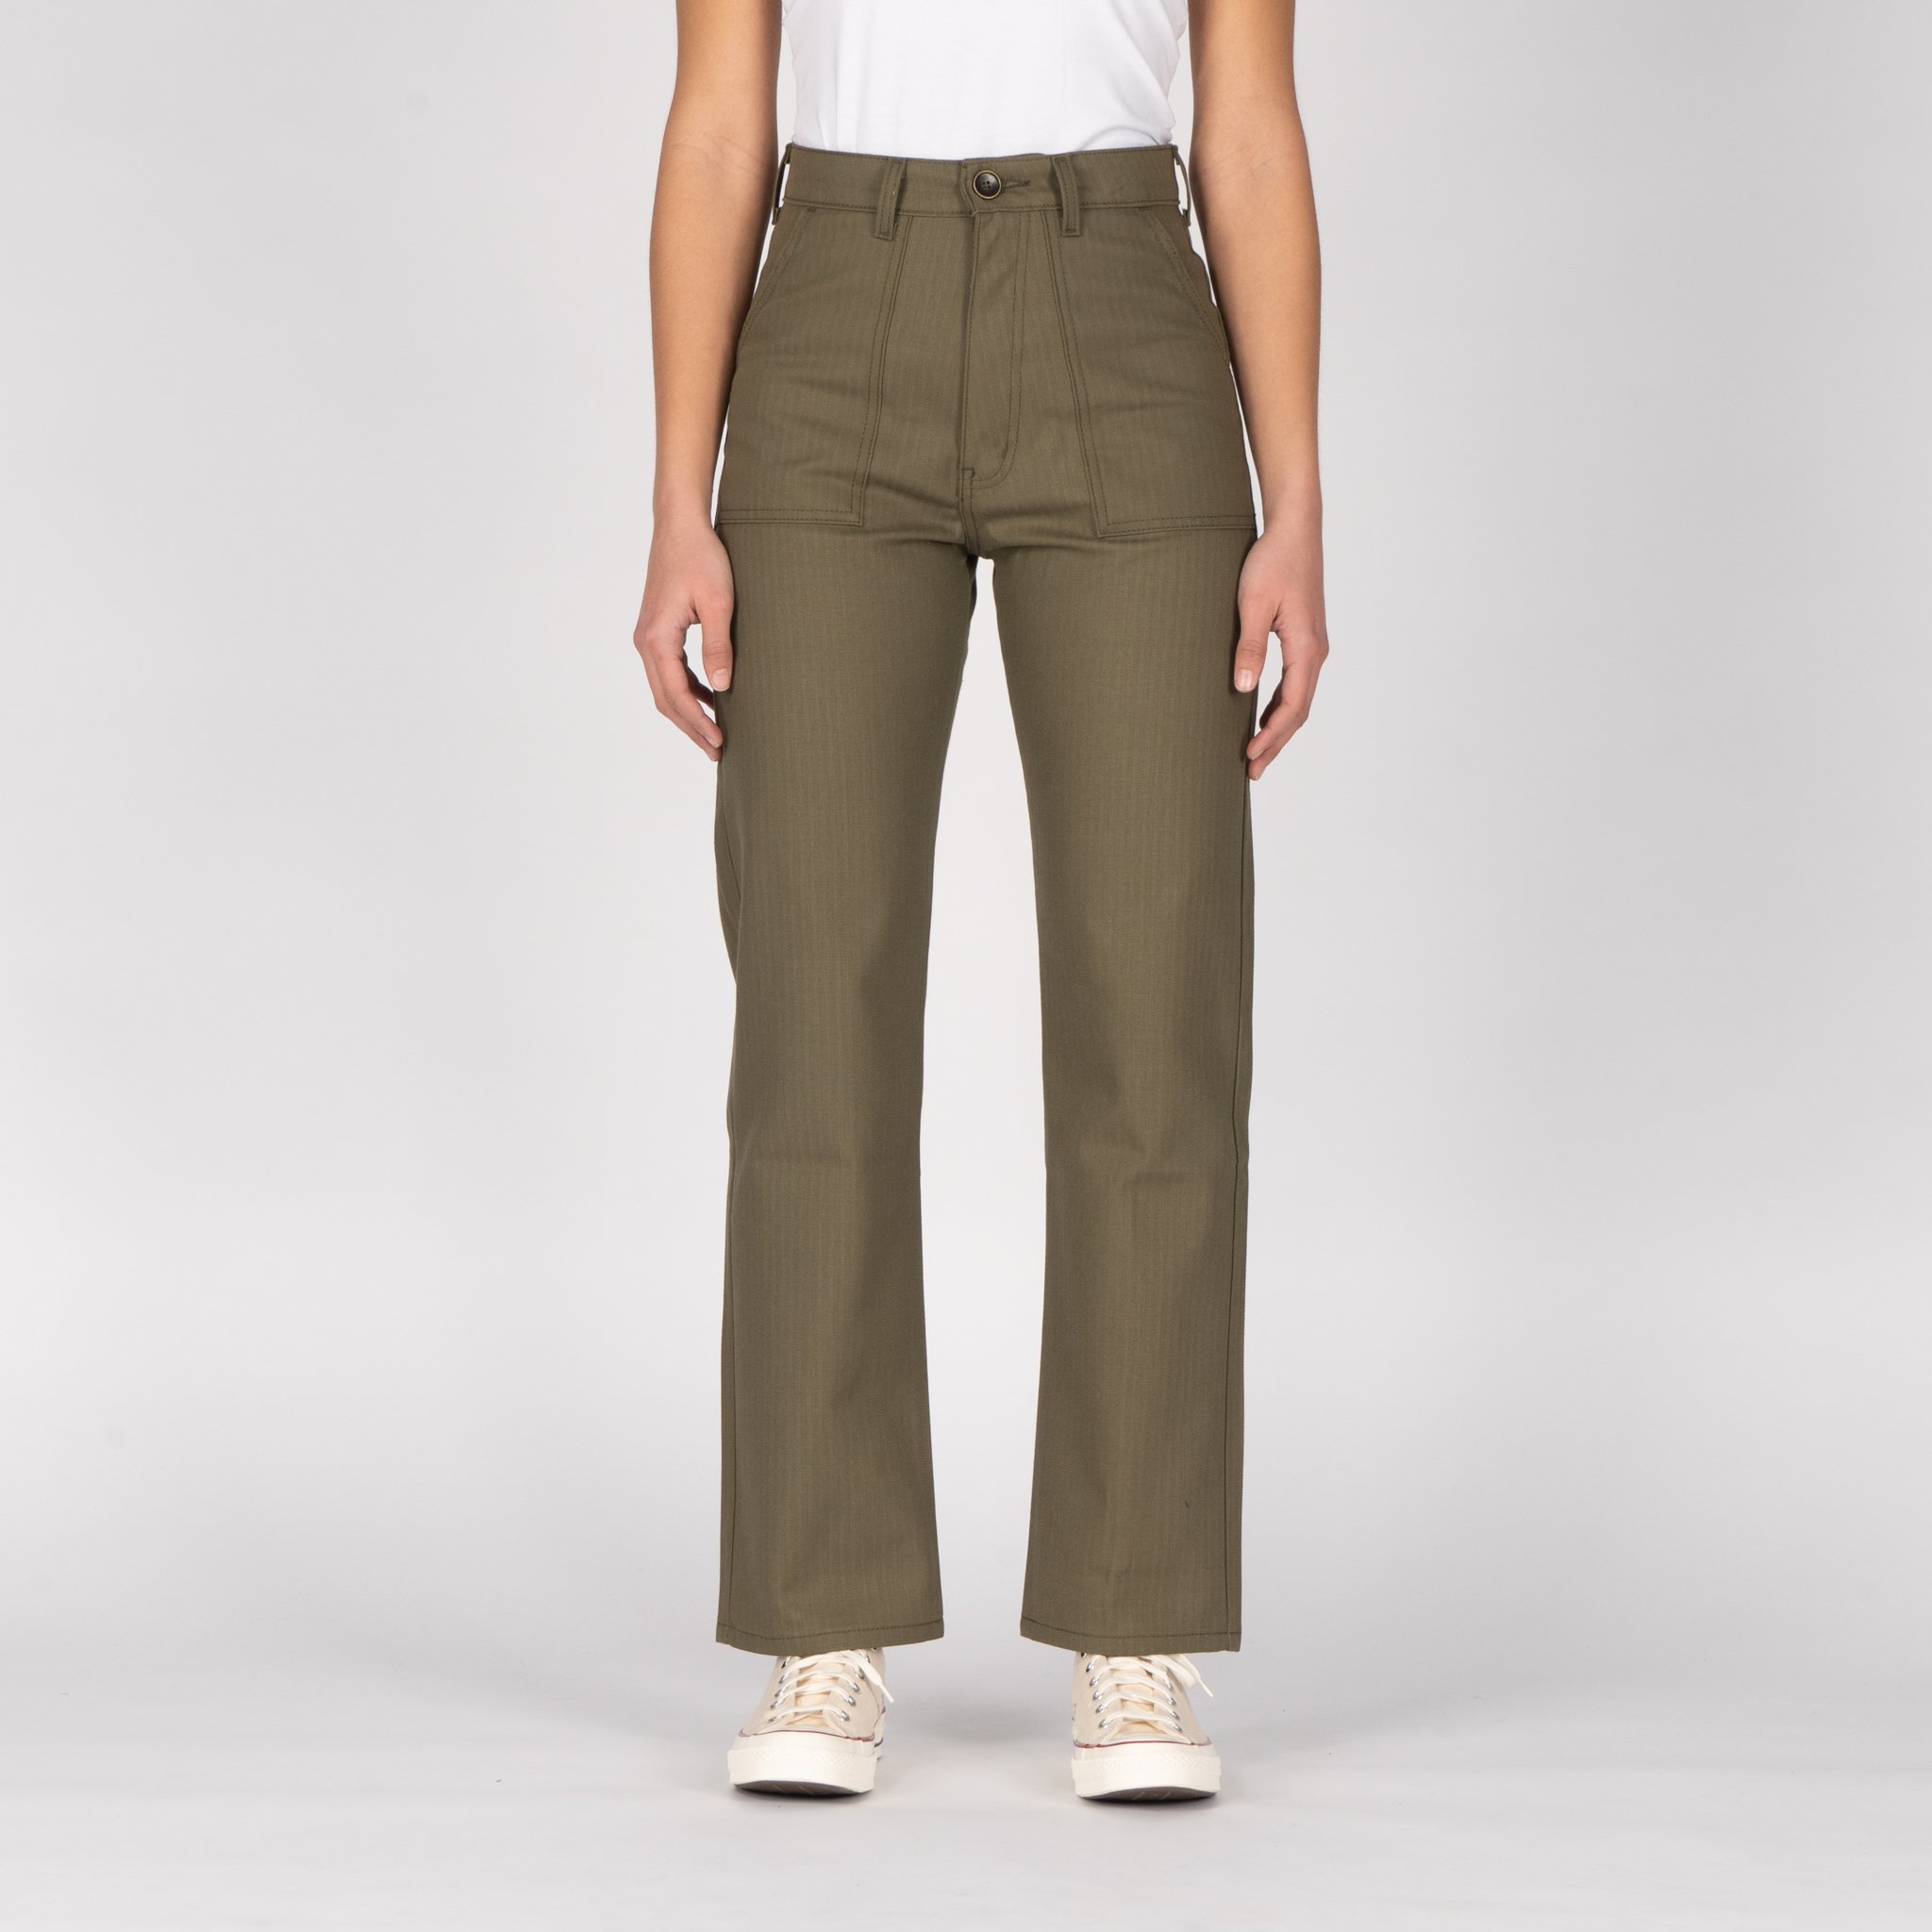 Women's - Classic Fatigue - Army HBT - Olive Drab | Naked & Famous Denim